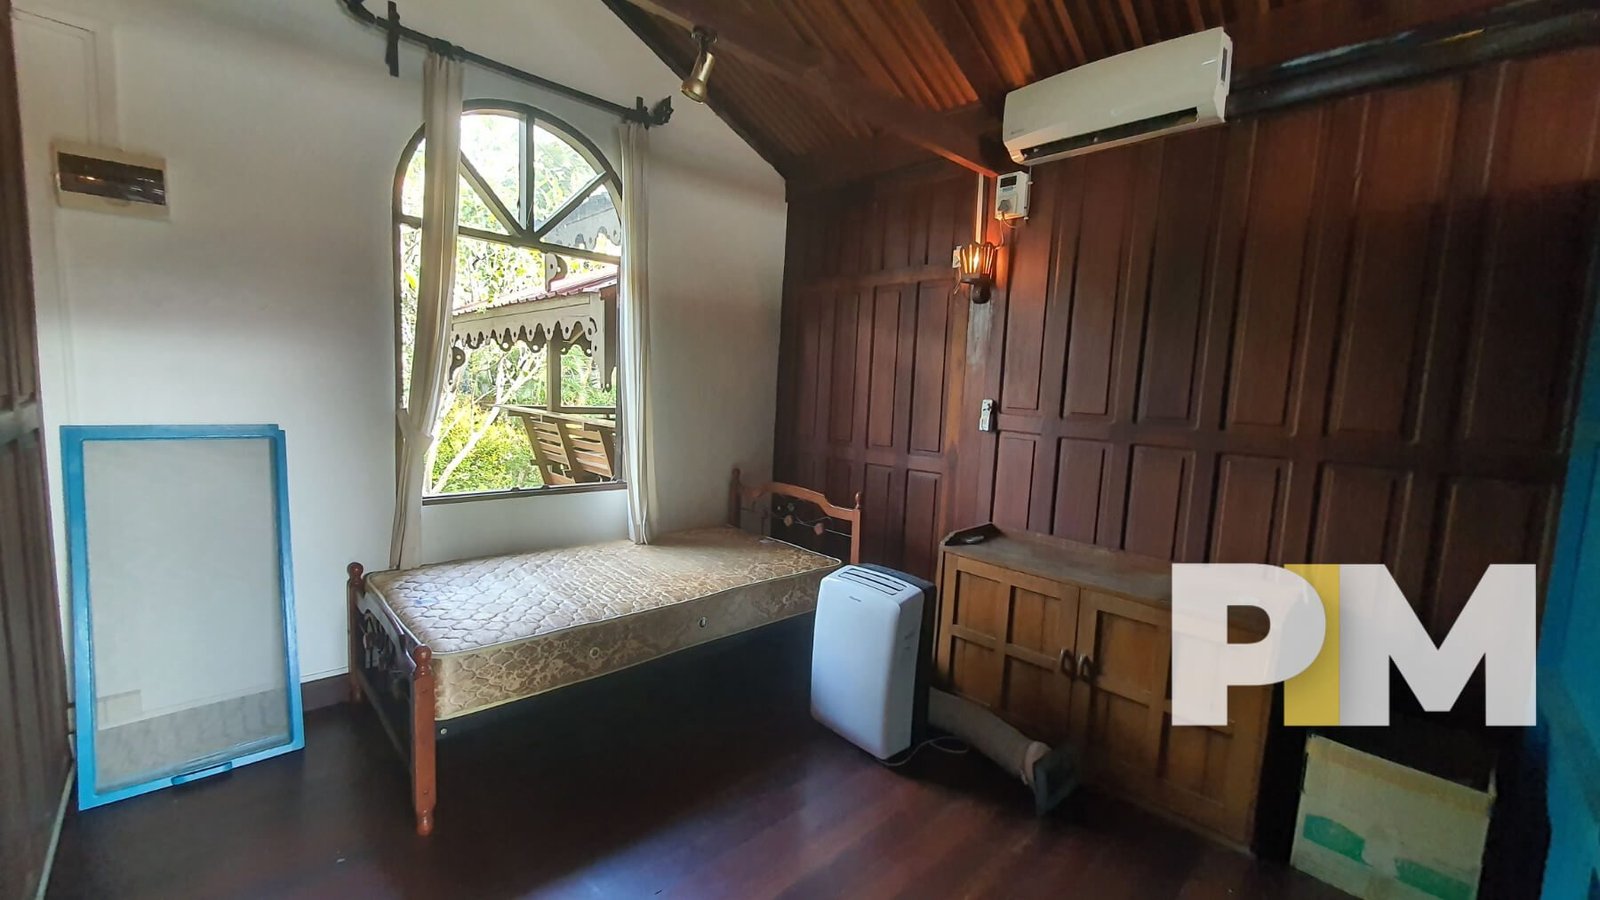 Room with window - Property in Myanmar